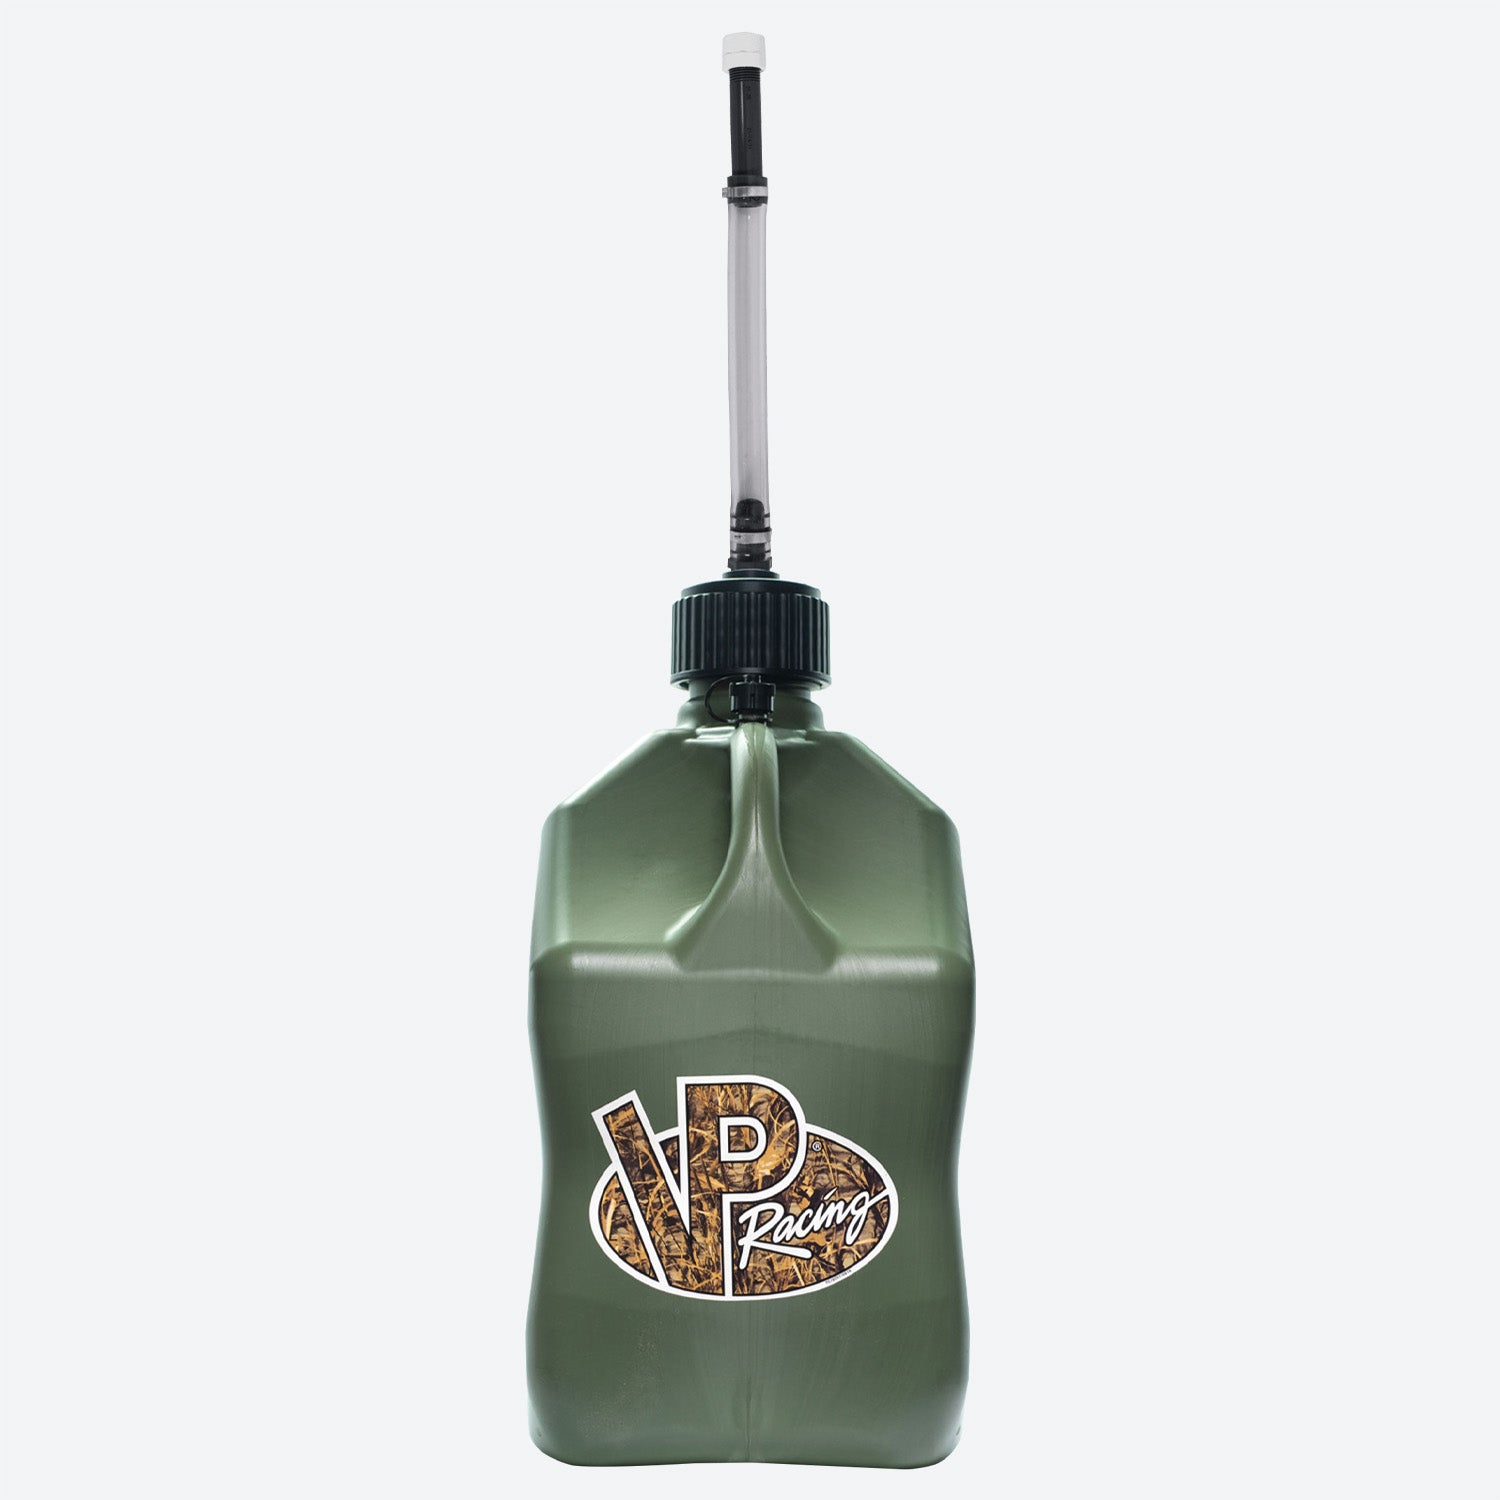 Motorsport Container 5.5 Gallon Camo Green With Deluxe Hose